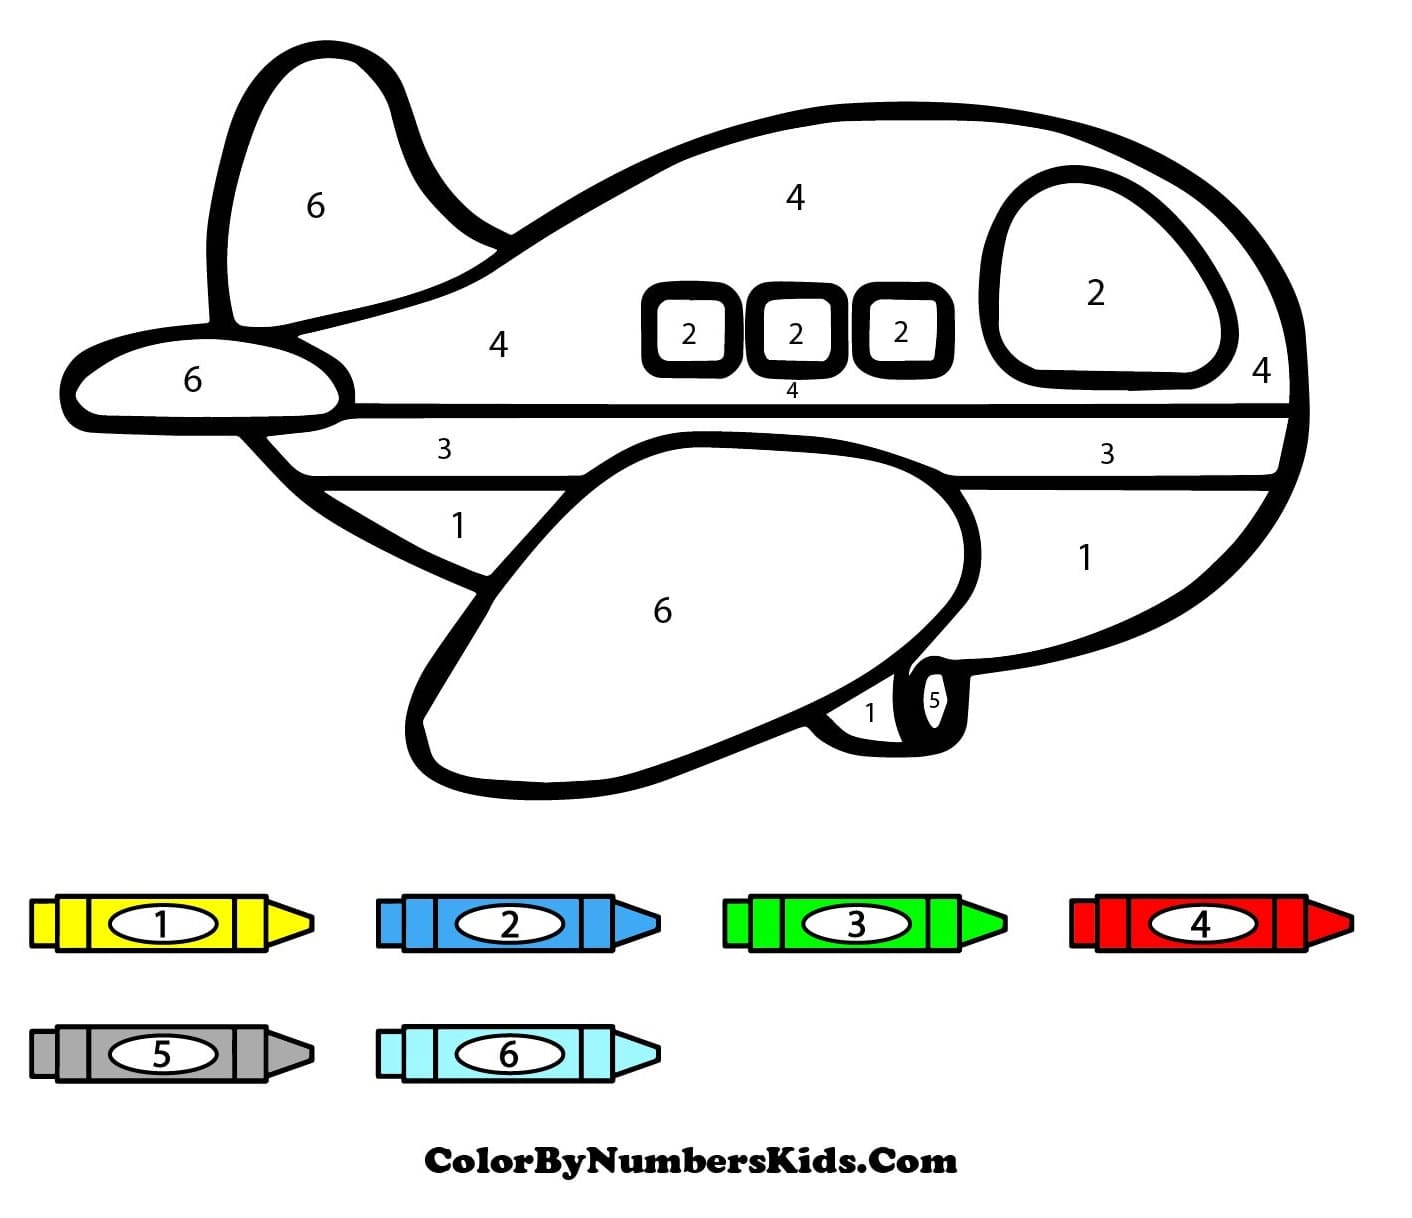 Airplane Color By Number Sheet